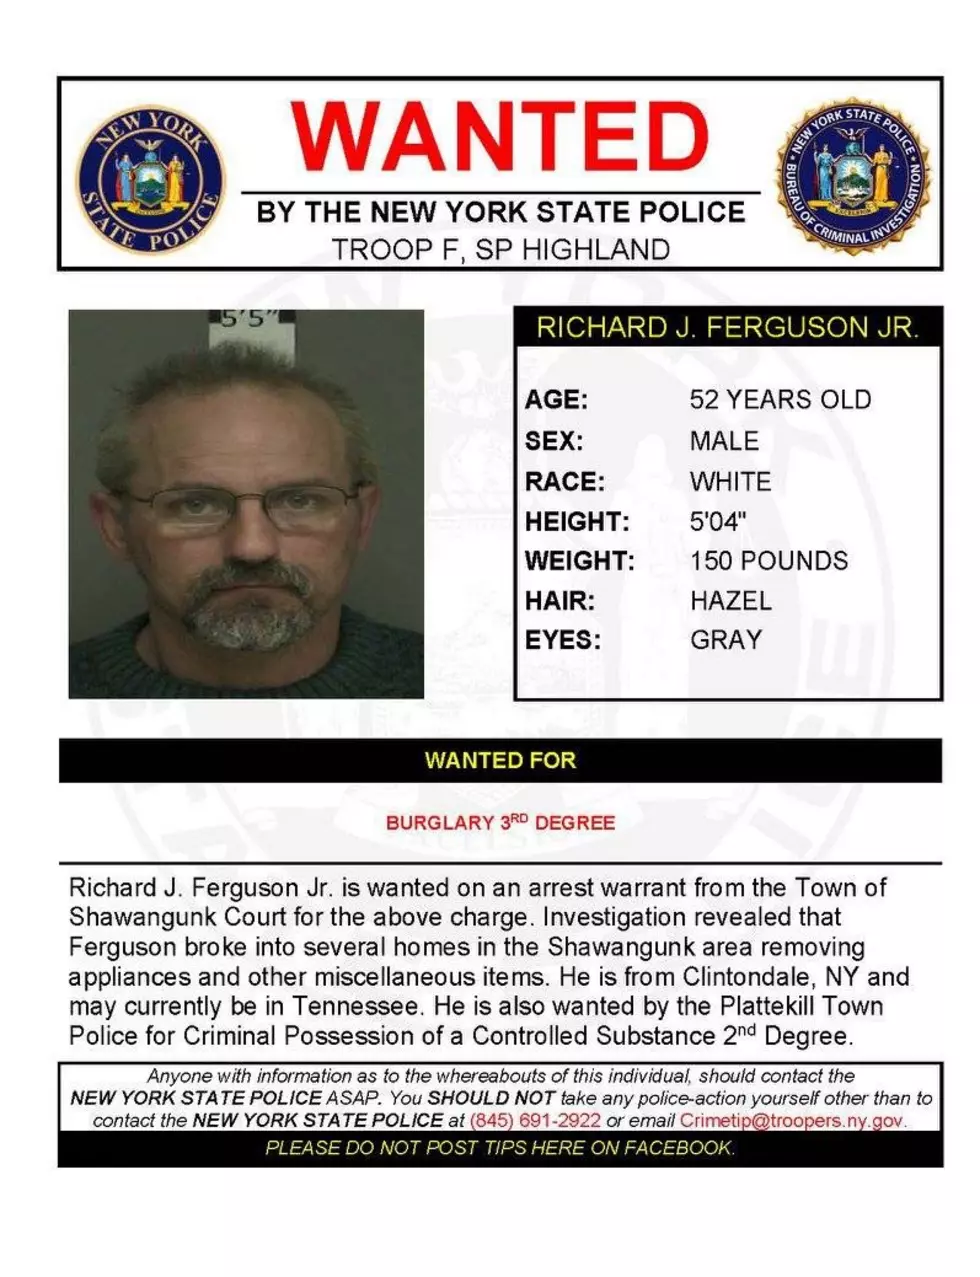 Warrant Wednesday: Ulster County Man Wanted For Burglary